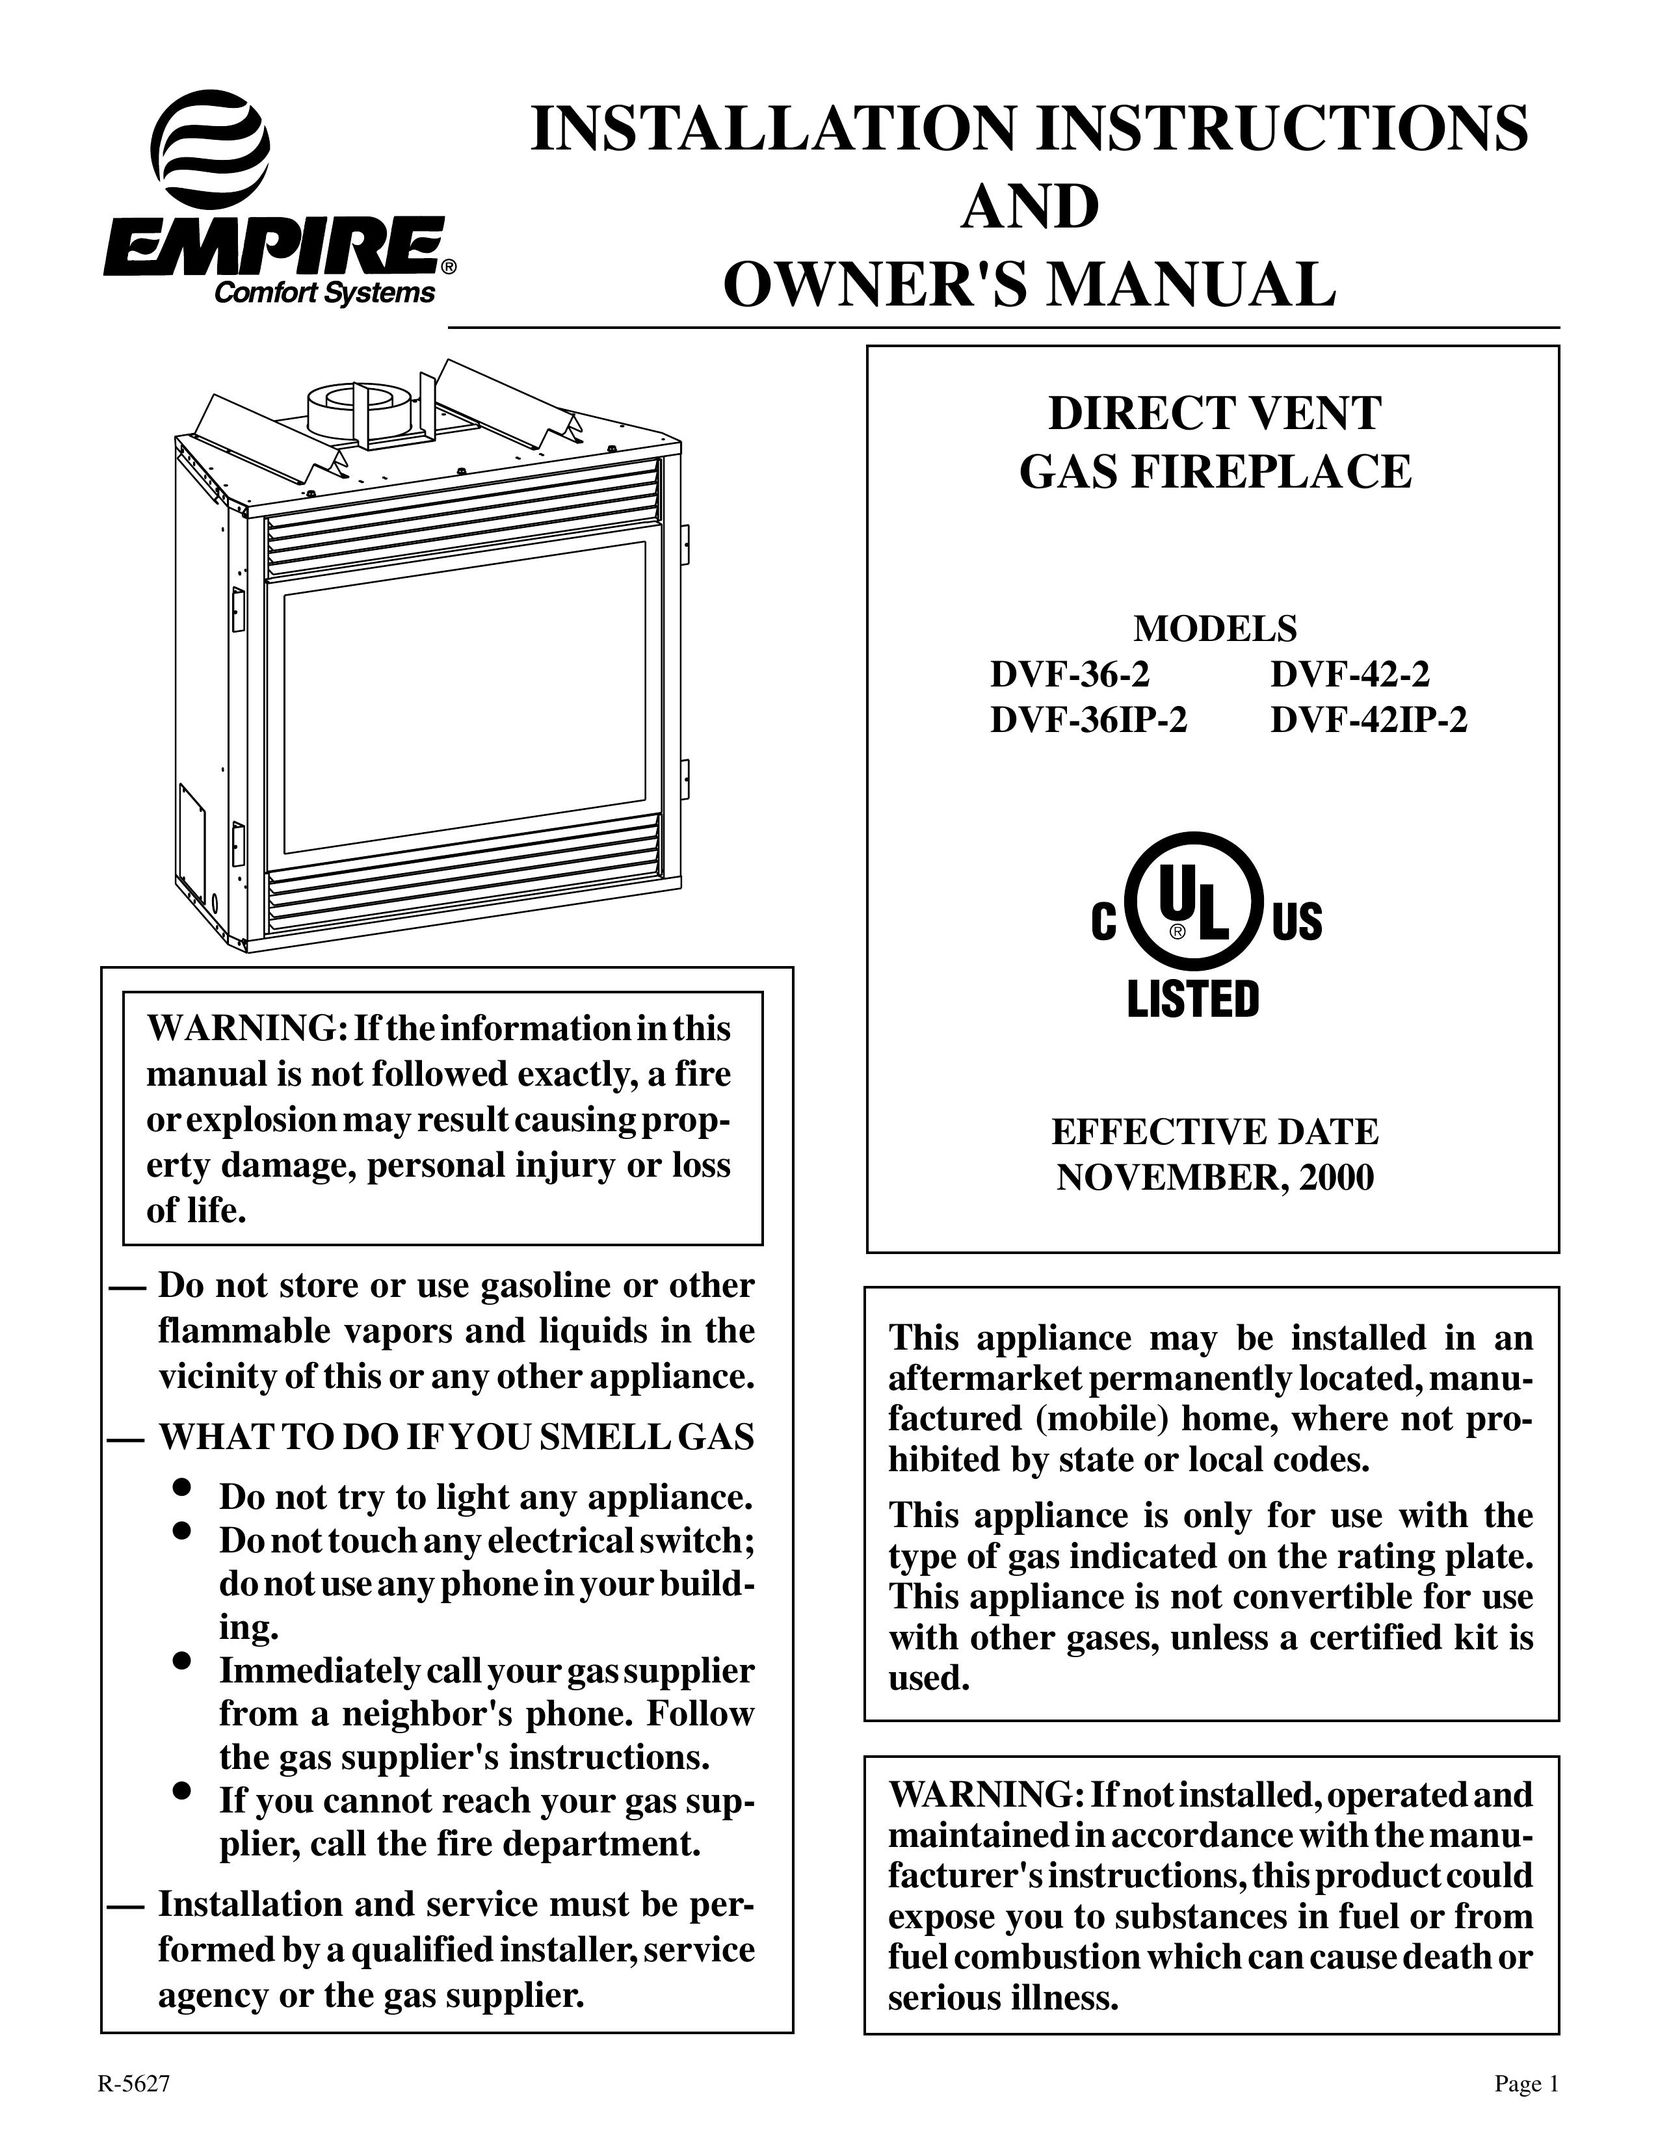 Empire Comfort Systems DVF-36-2 Indoor Fireplace User Manual